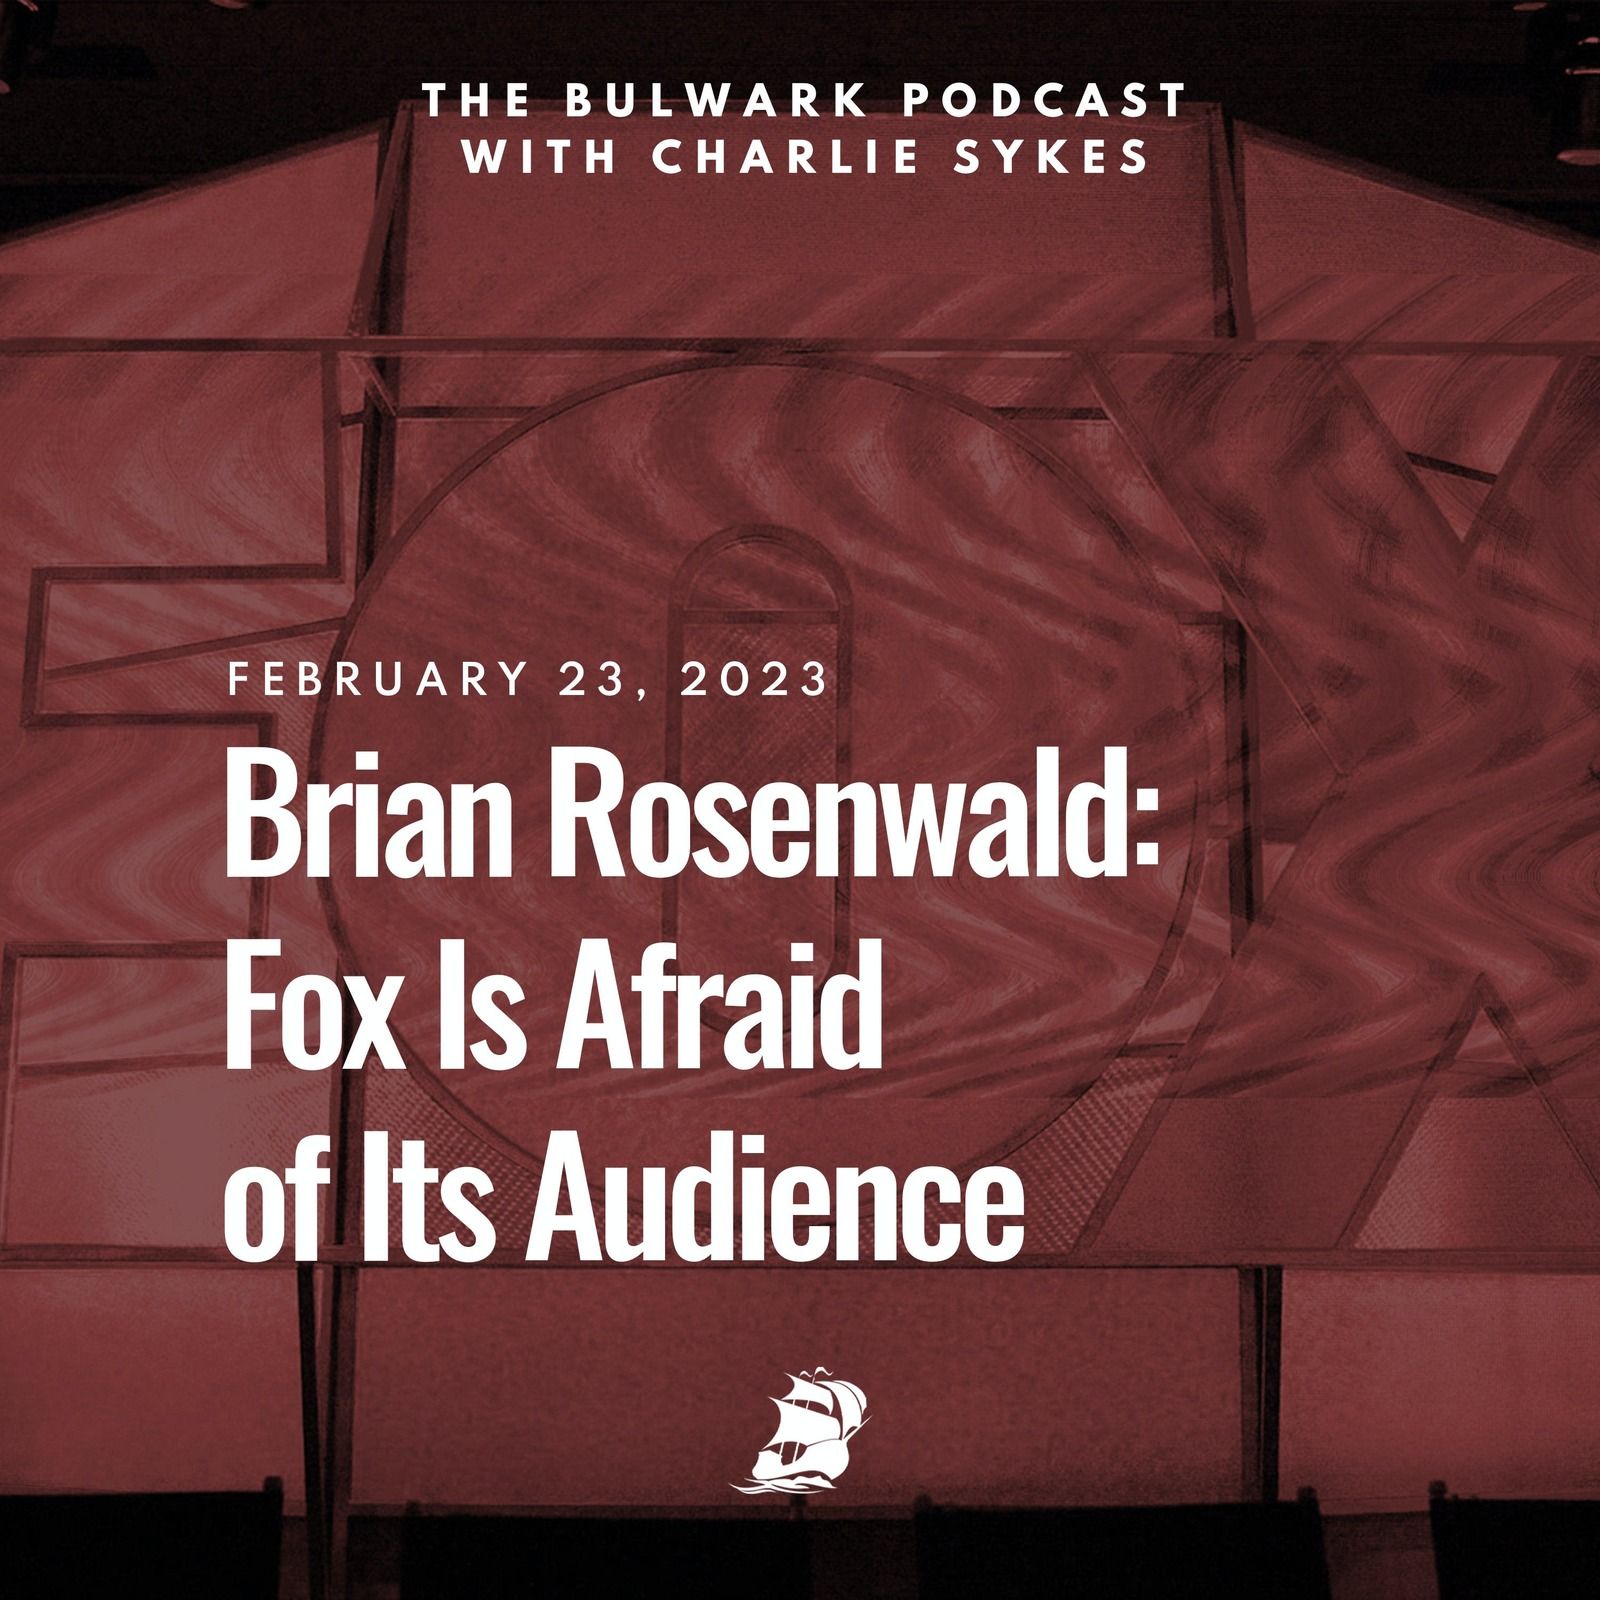 Brian Rosenwald: Fox Is Afraid of Its Audience by The Bulwark Podcast